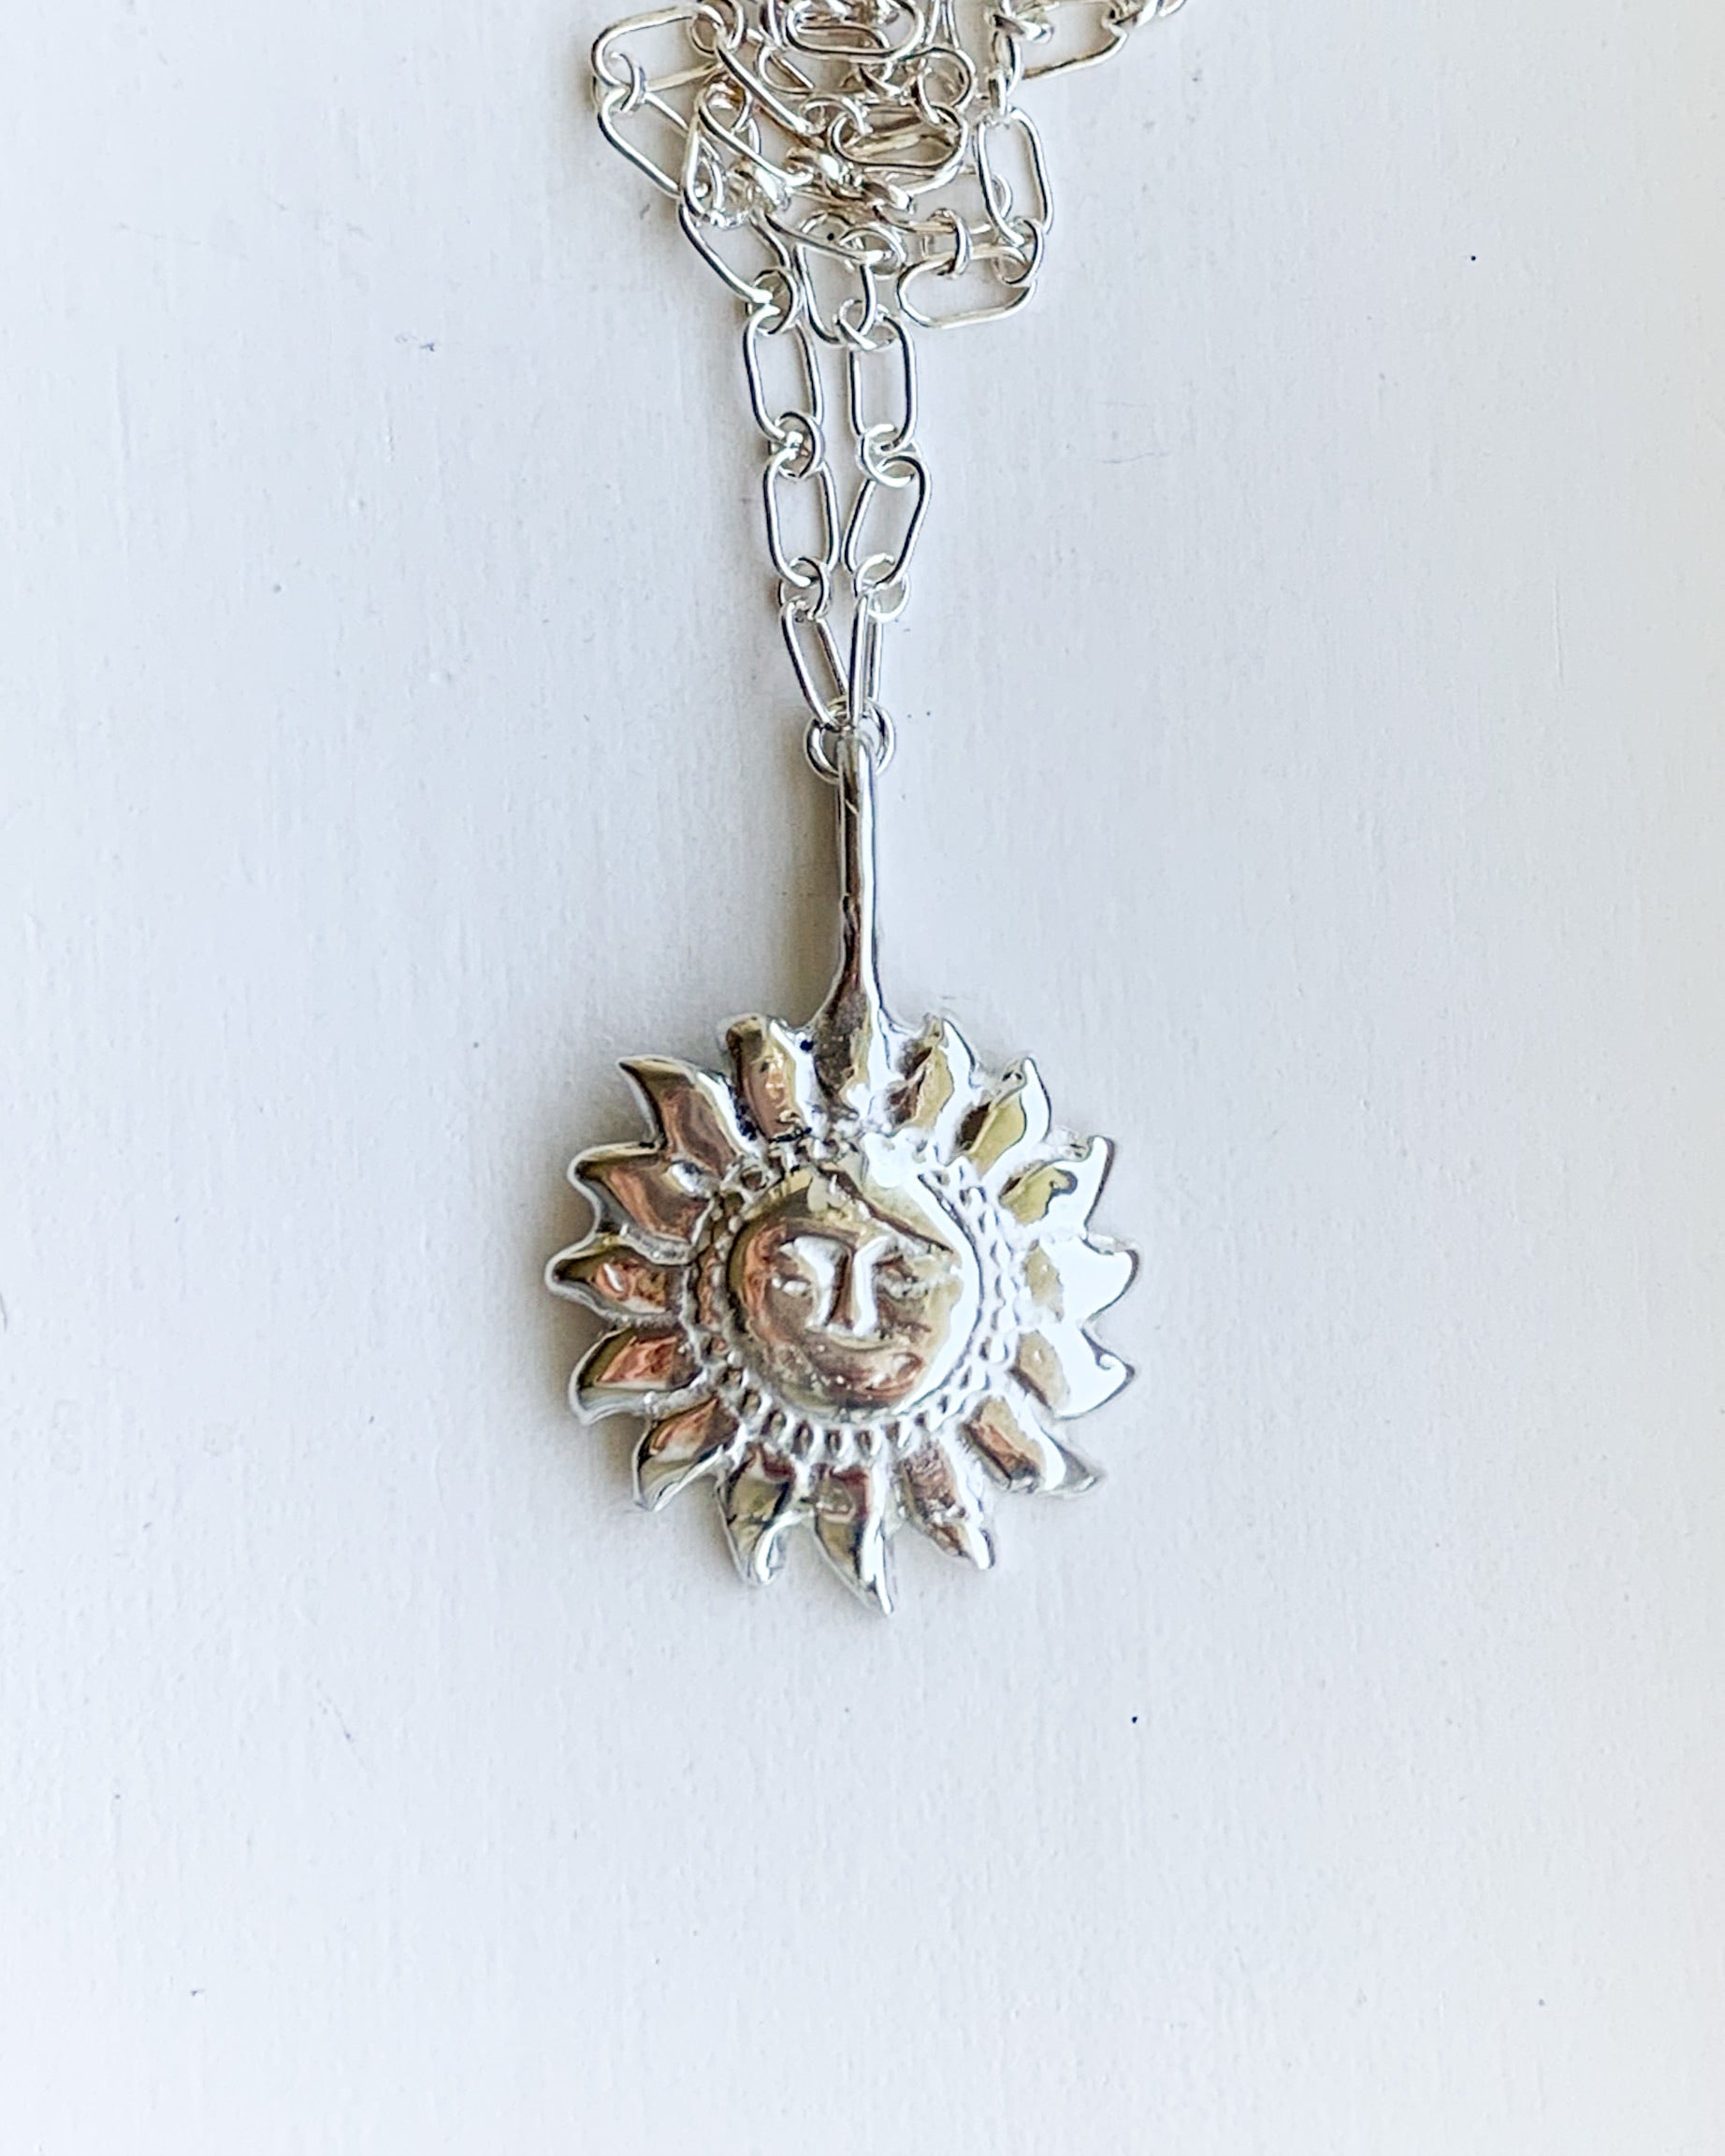 a silver sun shaped pendant necklace on a silver chain, shown on a white background